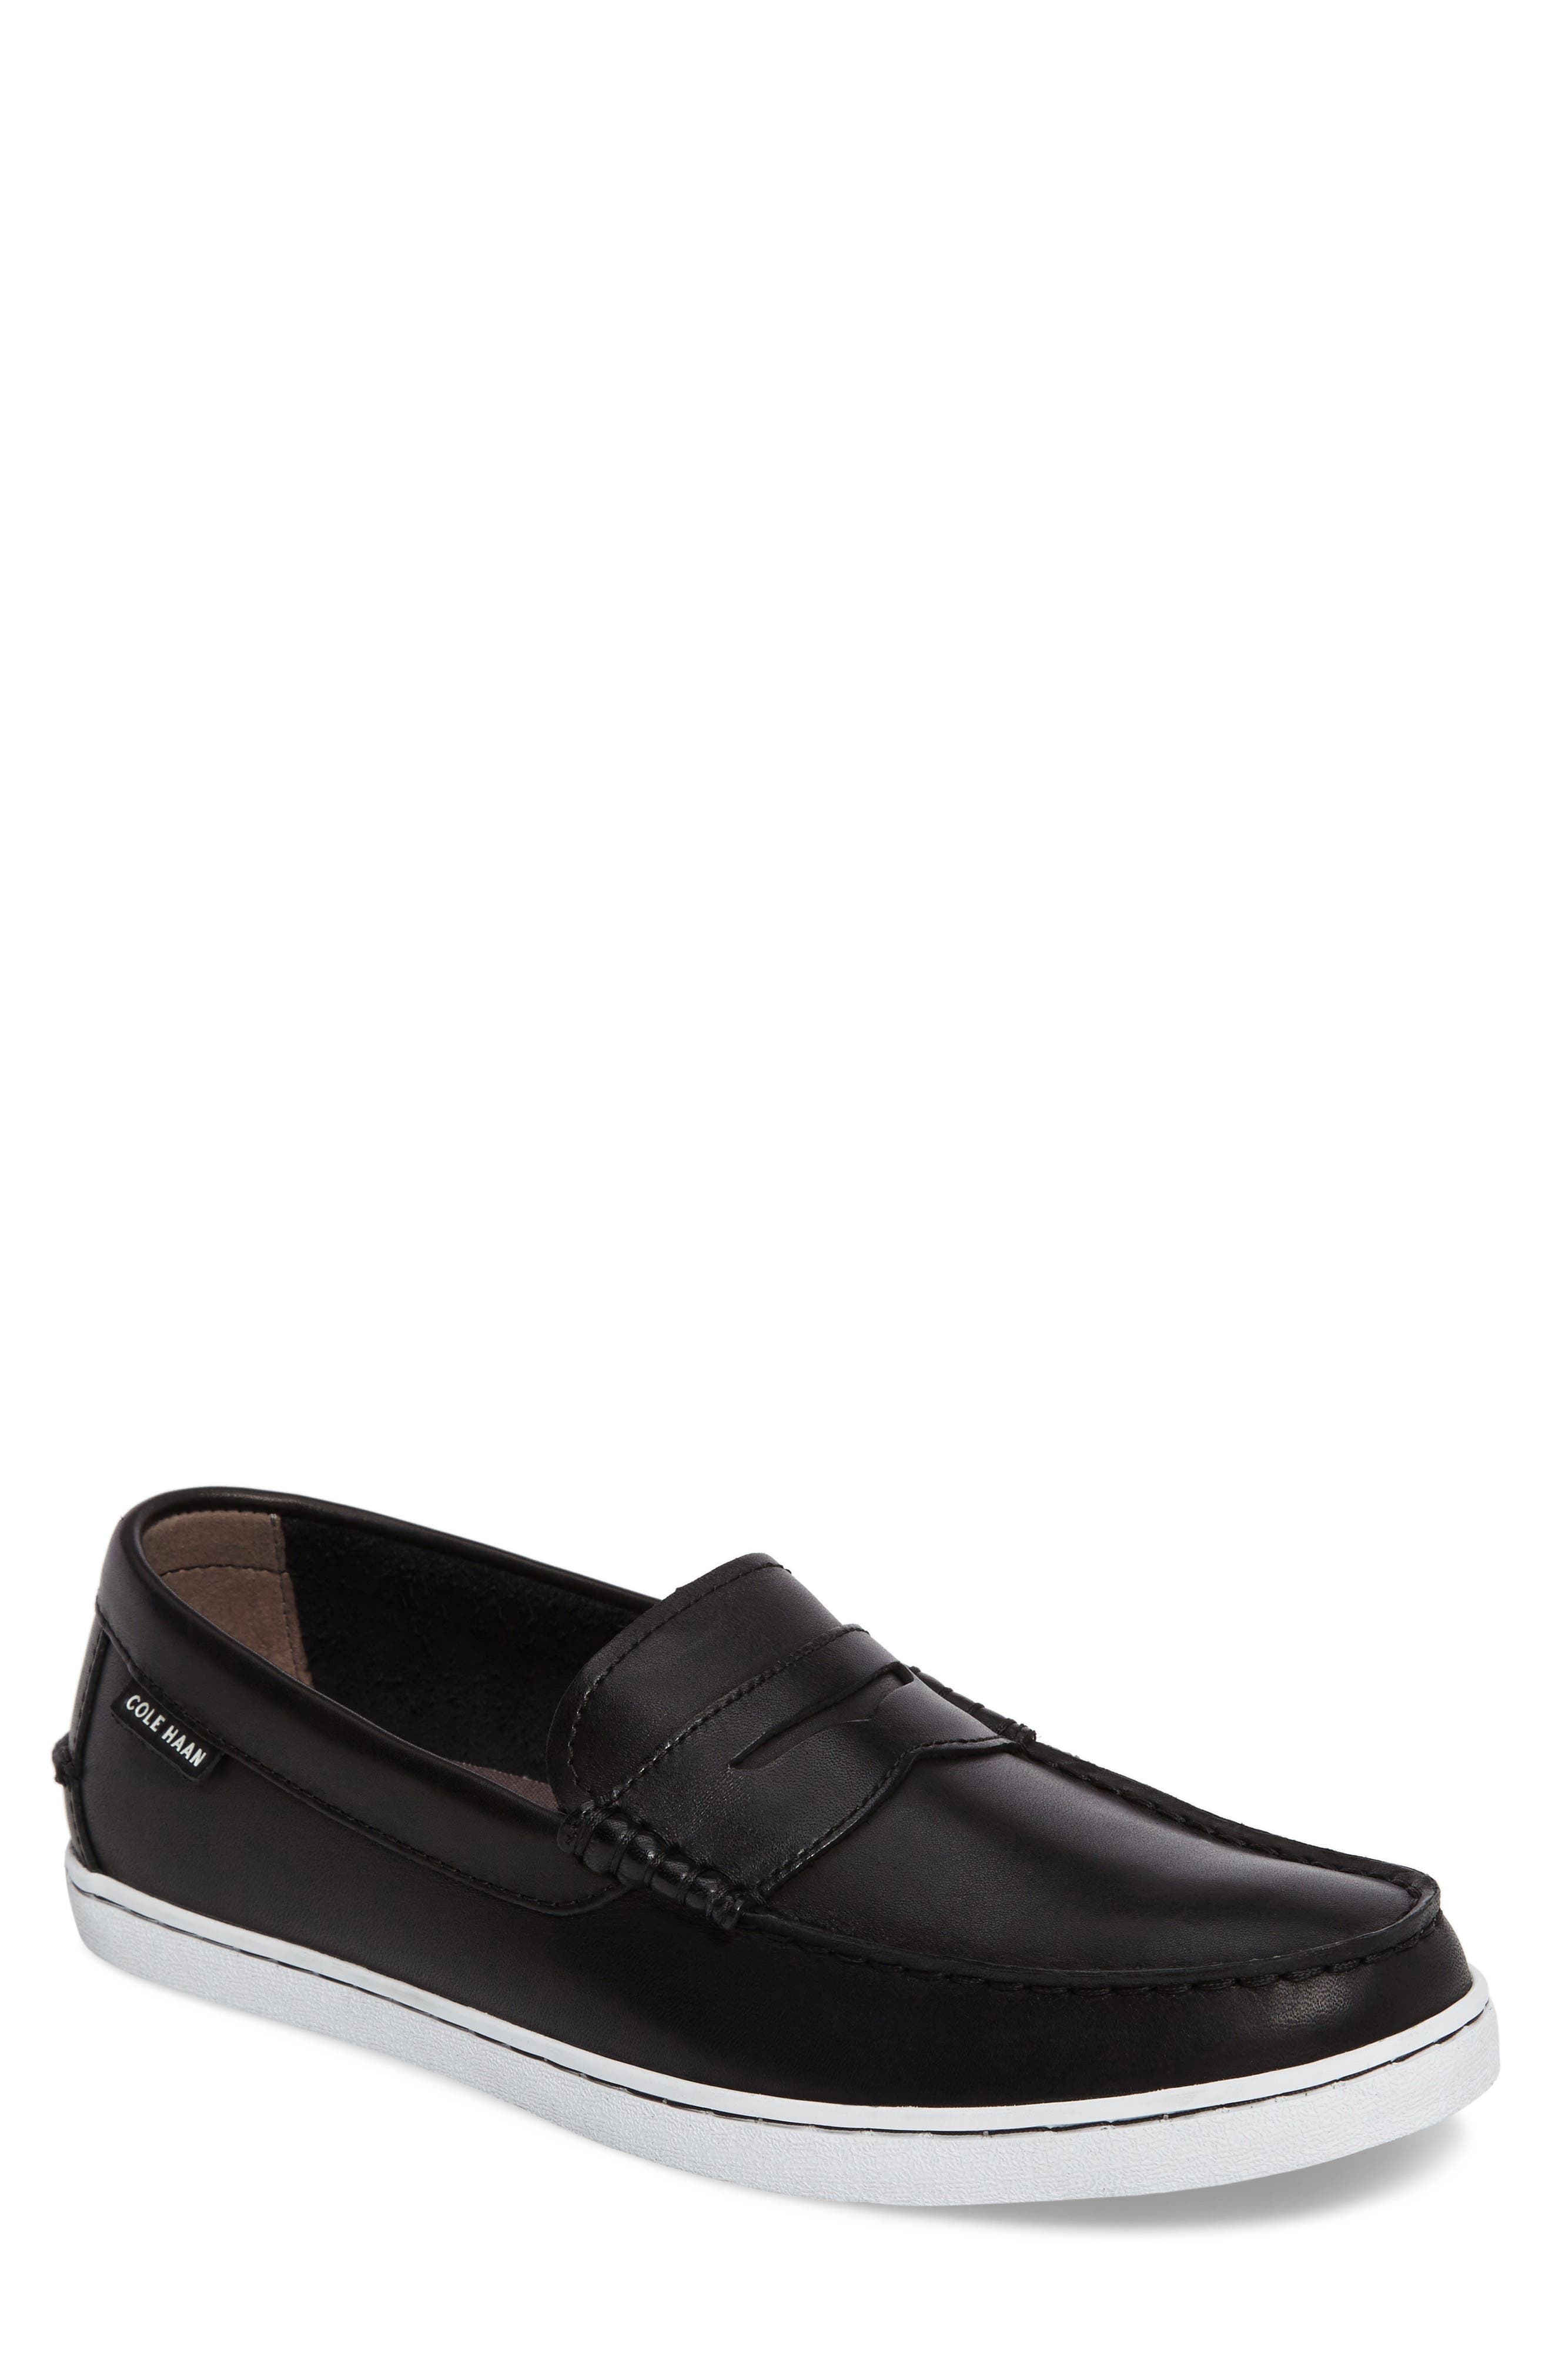 cole haan women's pinch penny loafer